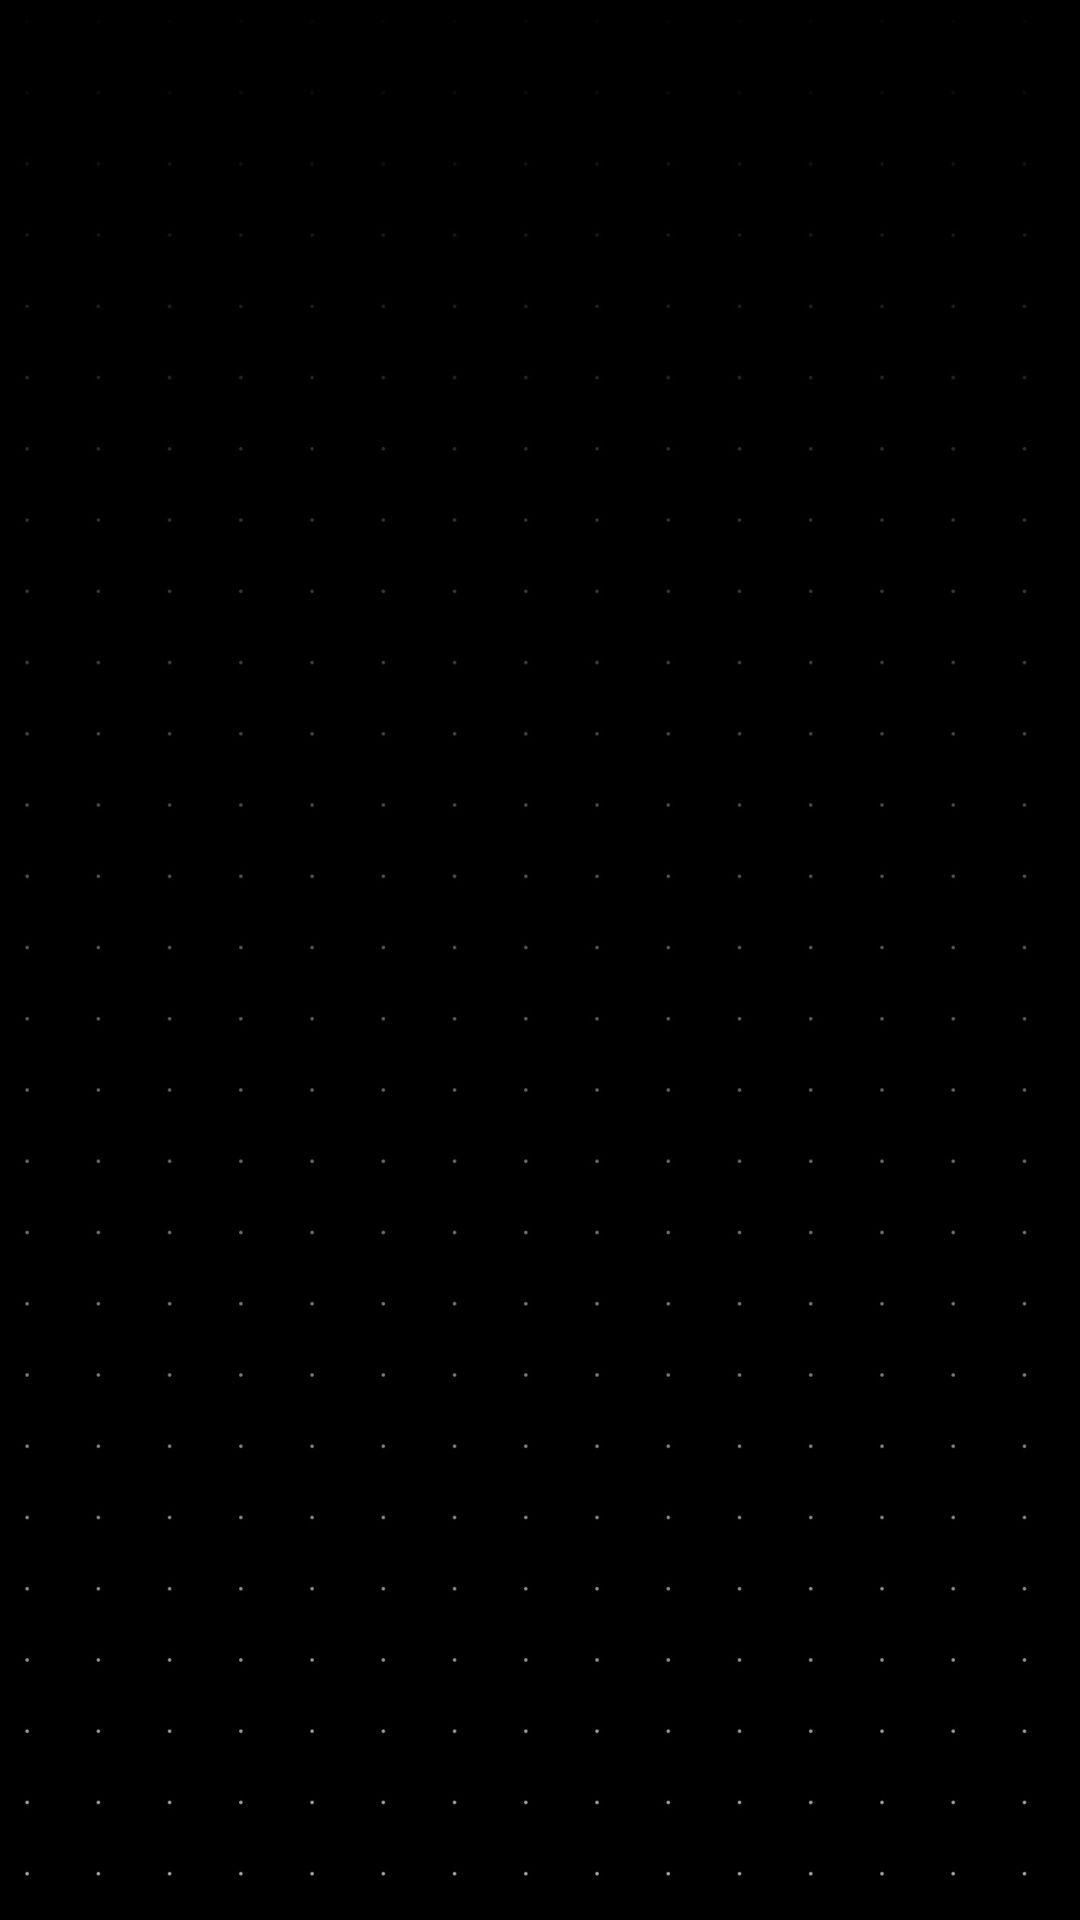 Dots Dark 4k iPhone 6s, 6 Plus, Pixel xl , One Plus 3t, 5 HD 4k Wallpaper, Image, Background, Photo and Picture